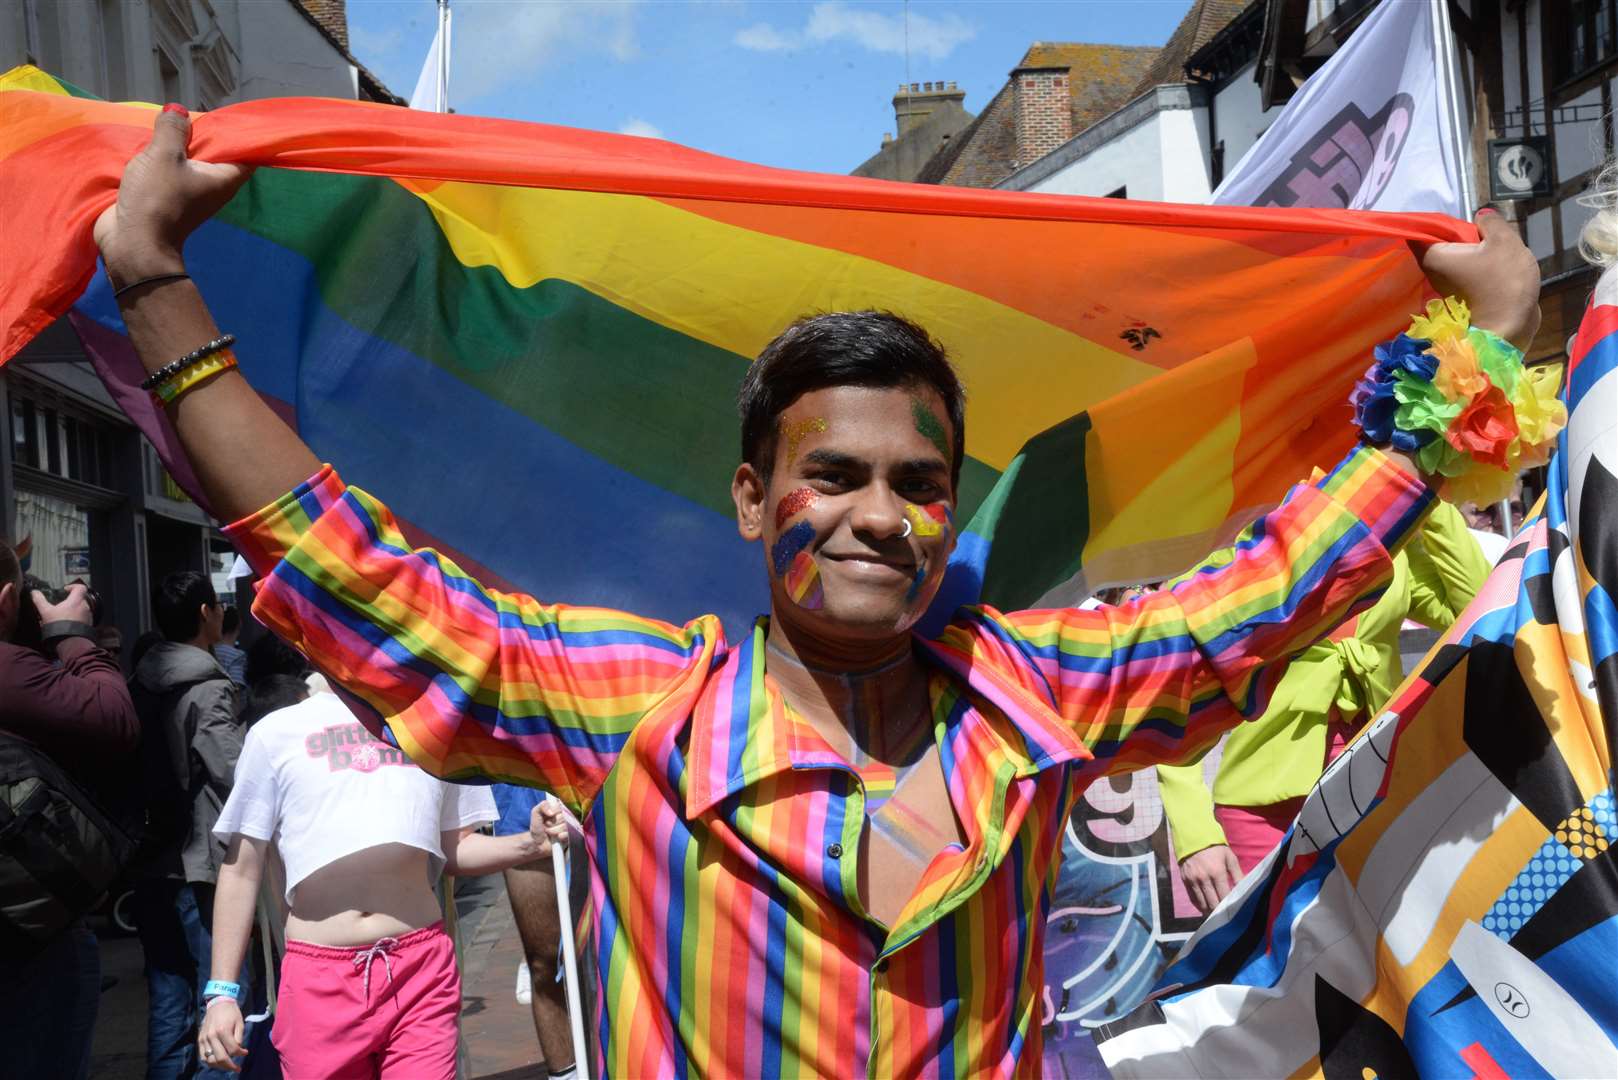 Canterbury Pride typically attracts crowds of more than 20,000 people